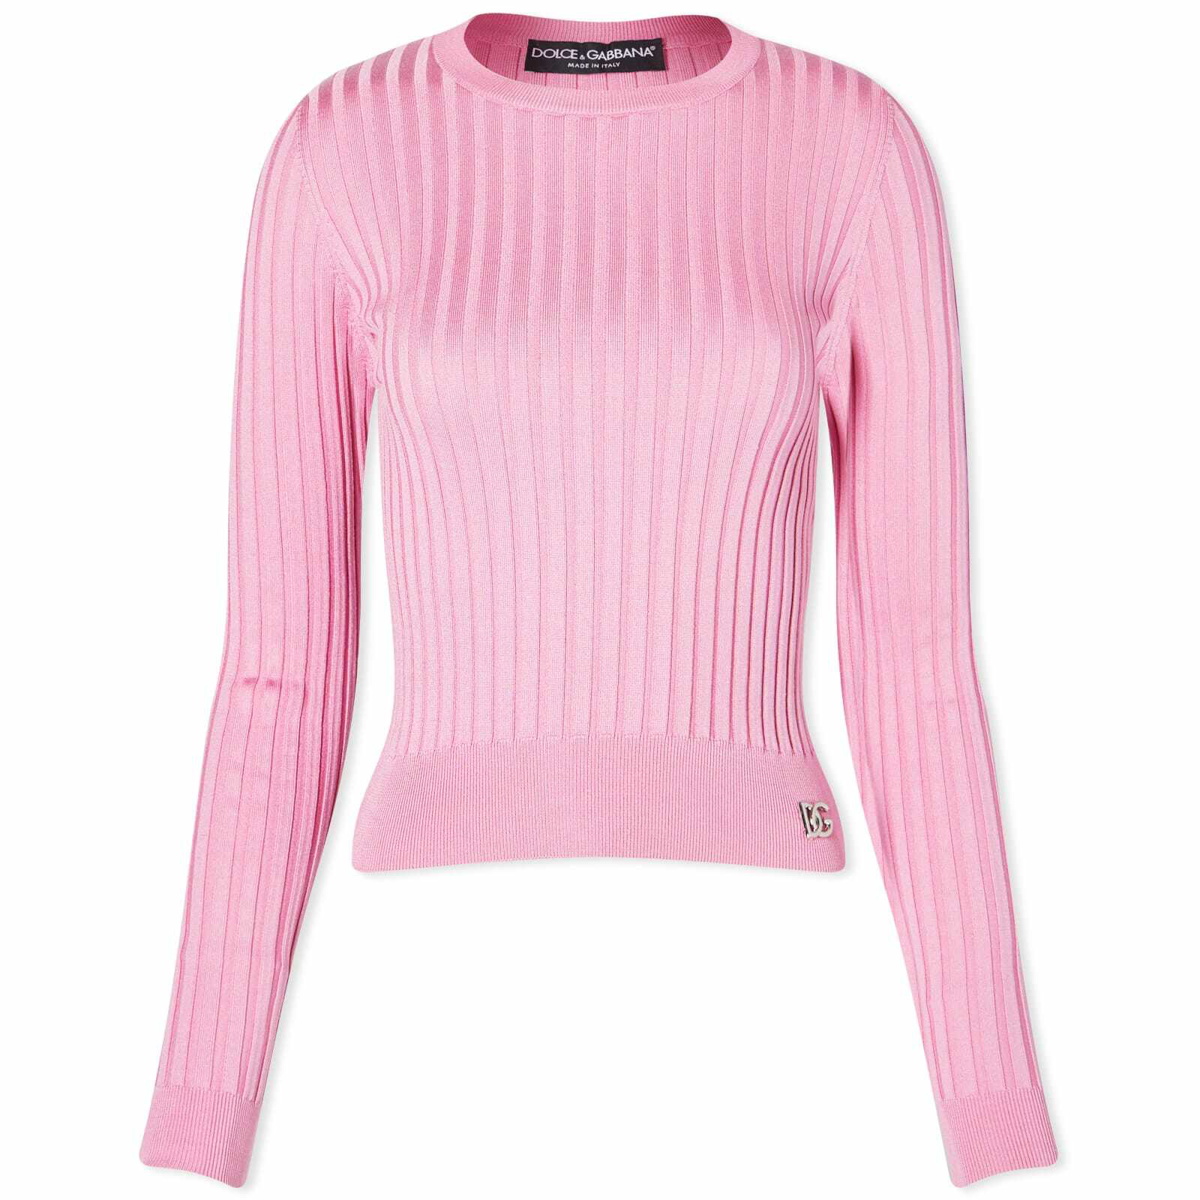 DG ribbed-knit silk cropped sweater in pink - Dolce Gabbana